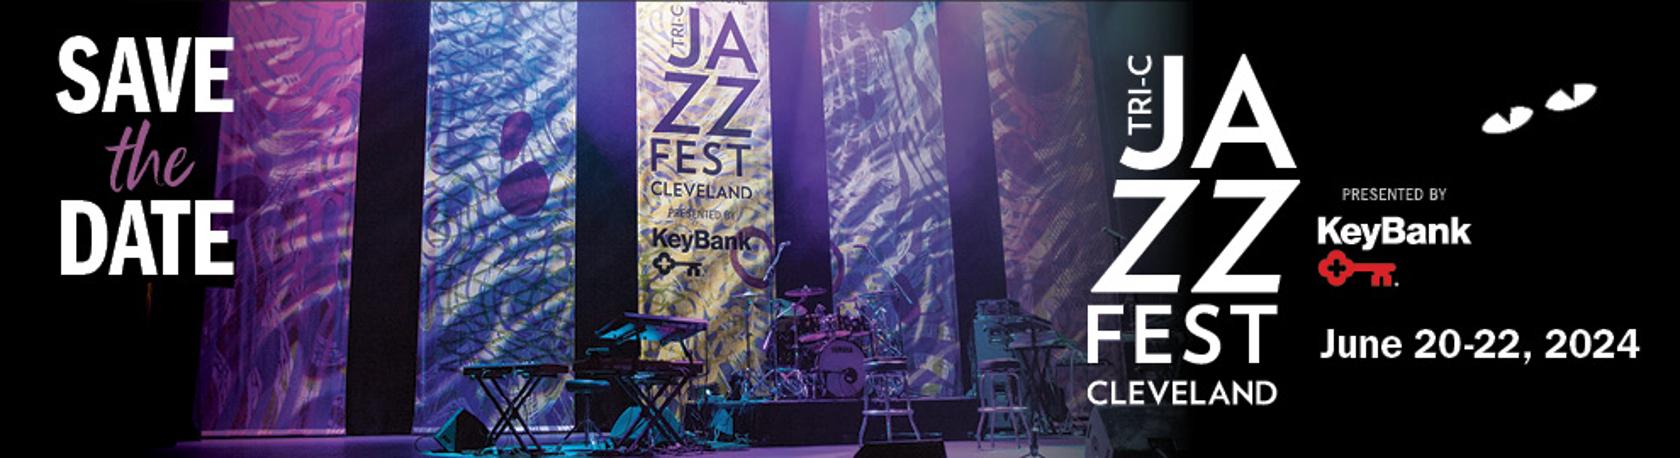 2024 Tri-C JazzFest Save the Date Image